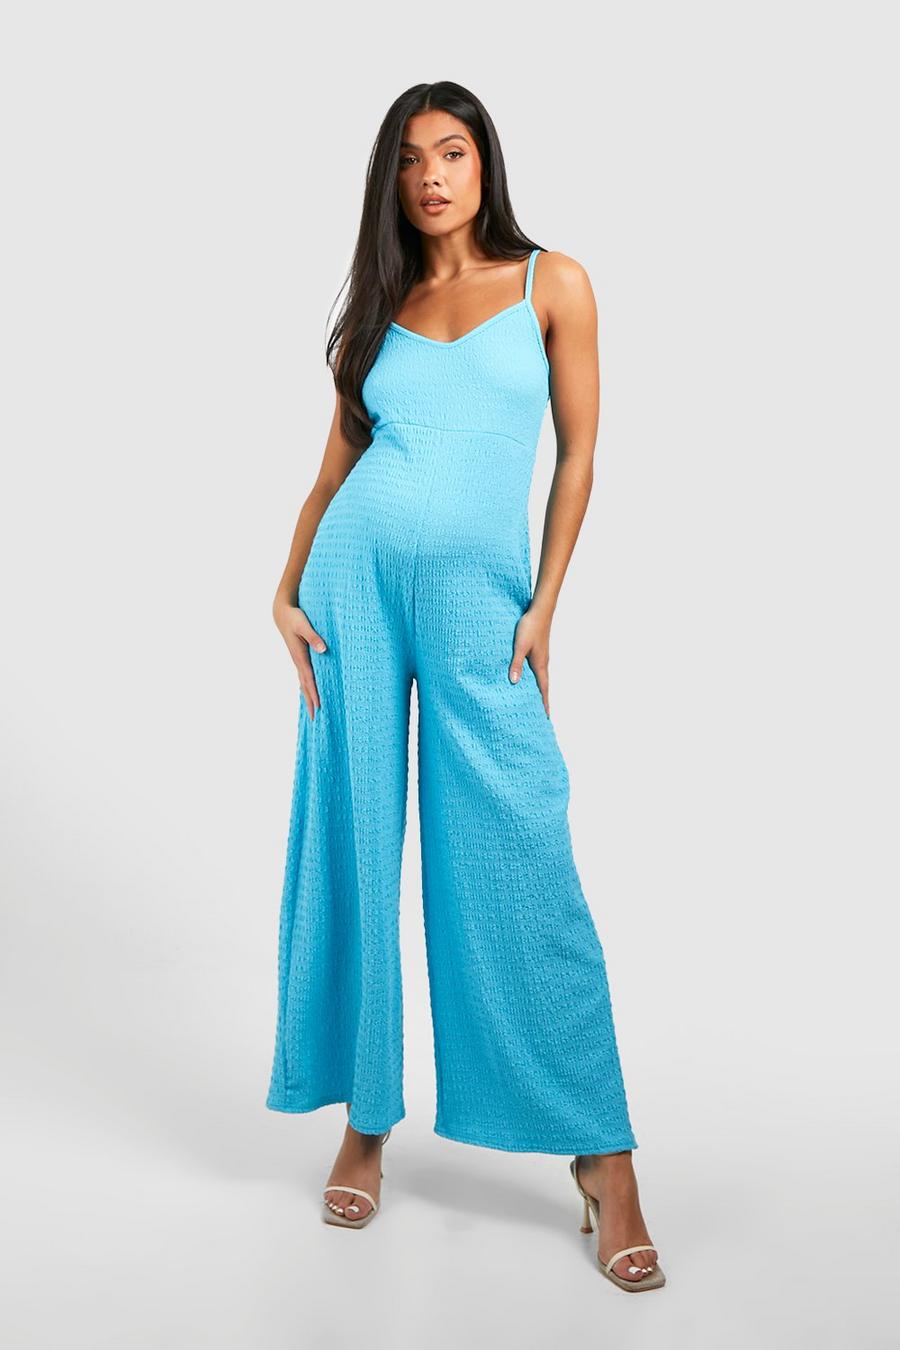 Turquoise Maternity Textured Culotte Jumpsuit